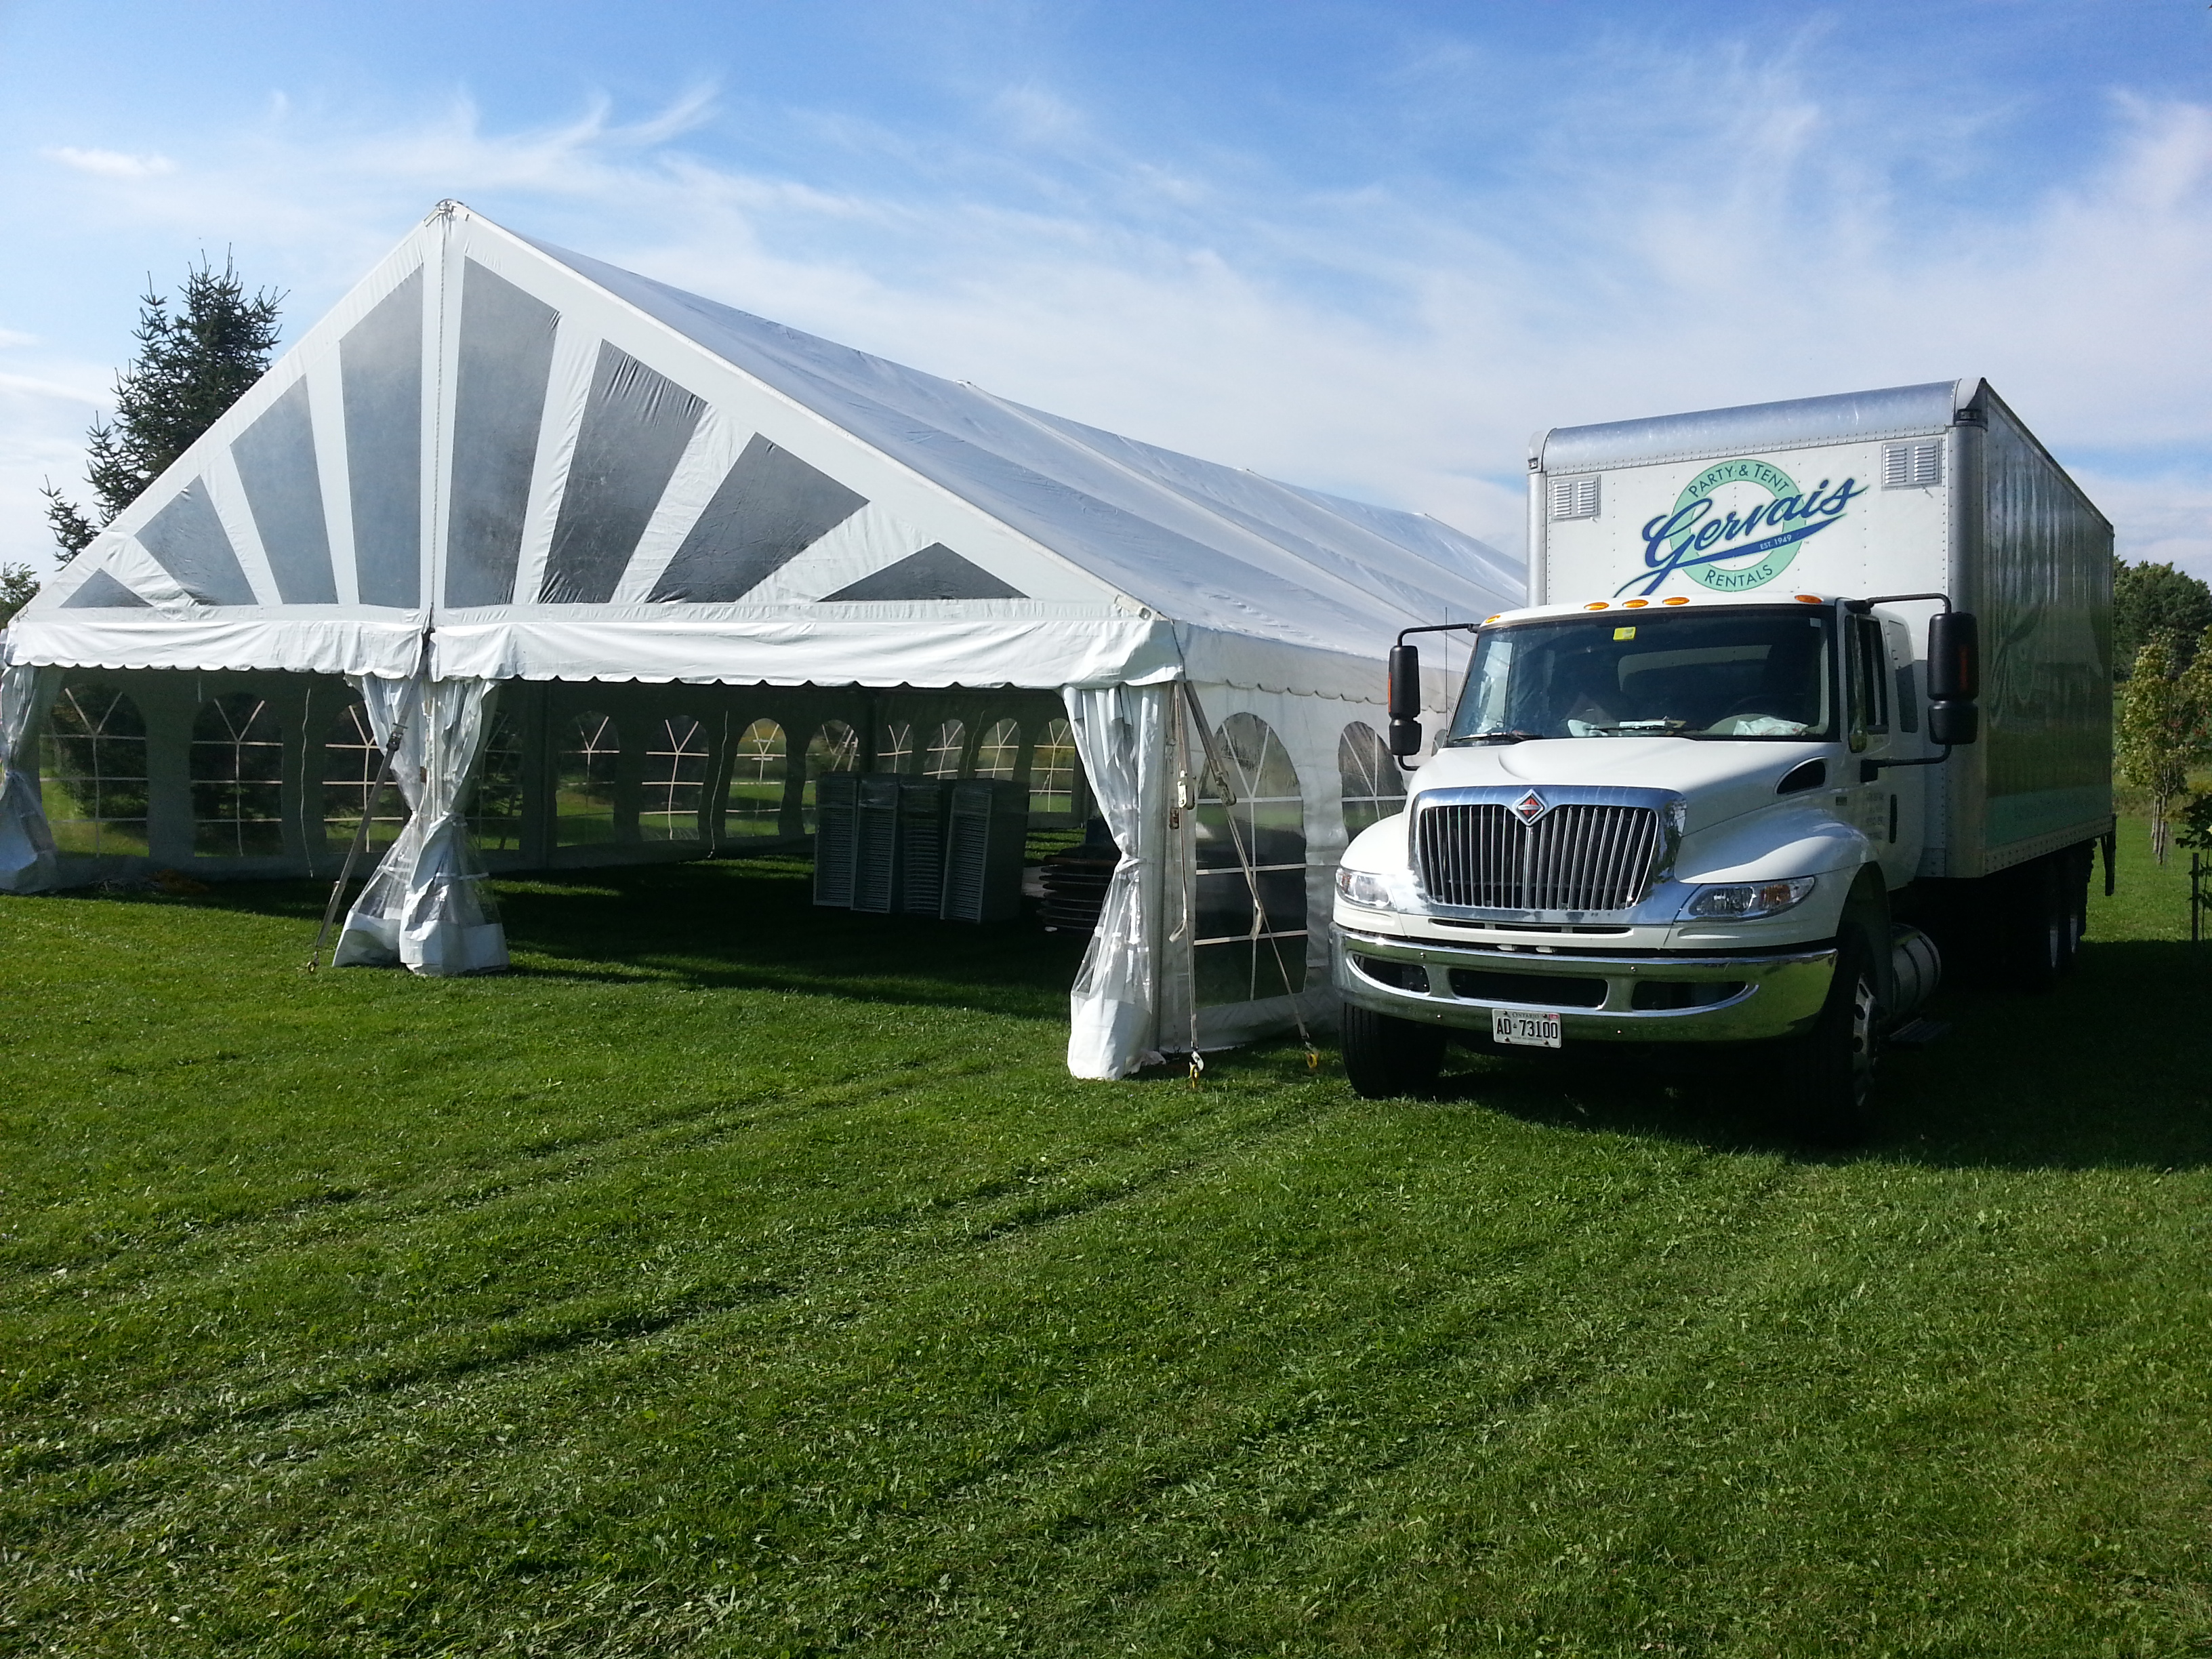 40X40 ULTIMATE FRAME TENT WHITE TOP (For up to 160 people just tables & chairs)